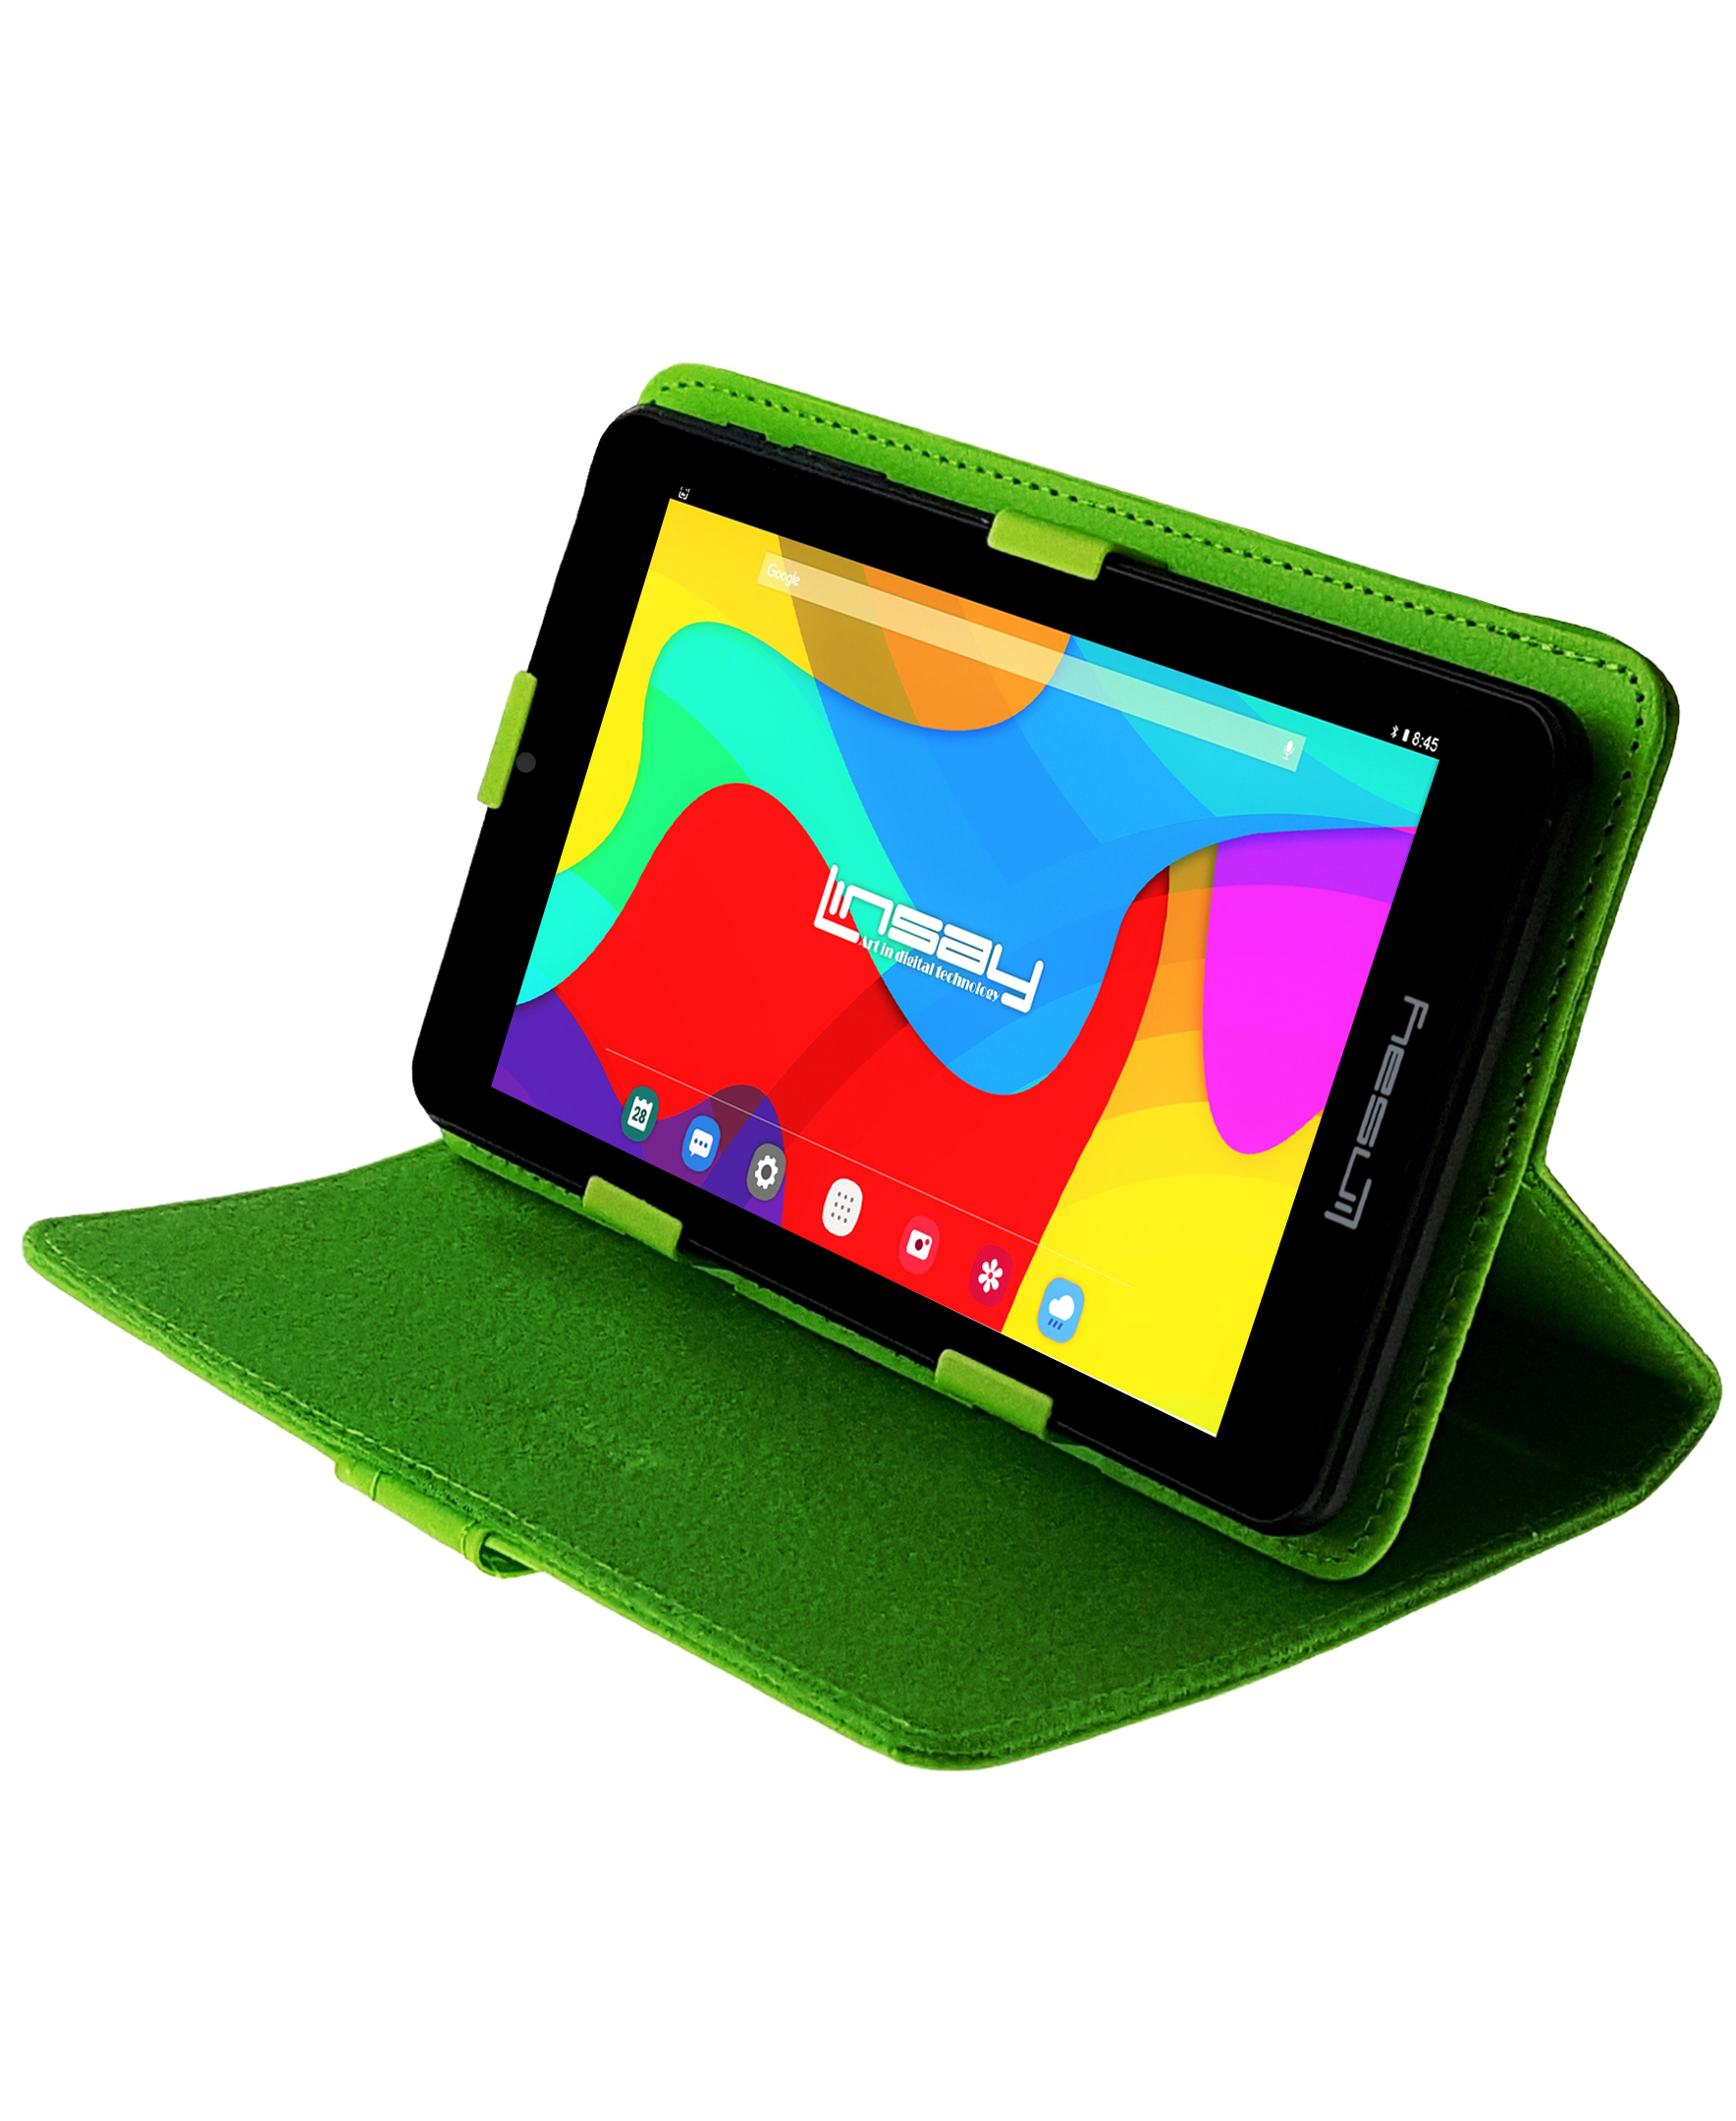 Linsay 7" 2GB RAM 32GB Android 12 Wi-Fi Tablet with Case Green, Pop Holder and Pen Stylus - image 2 of 3